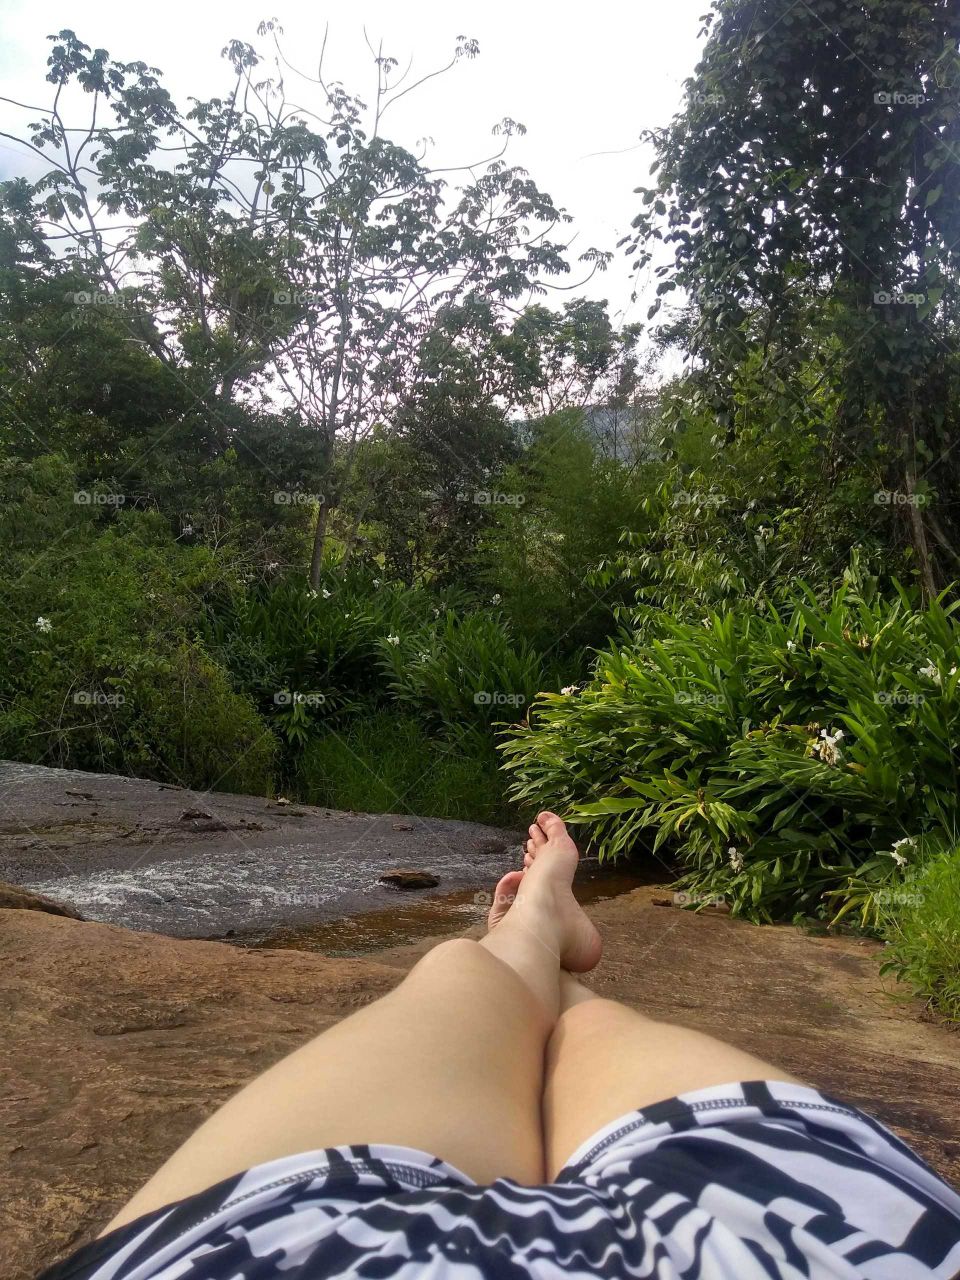 Laying near a Waterfall in summer time in Brazil